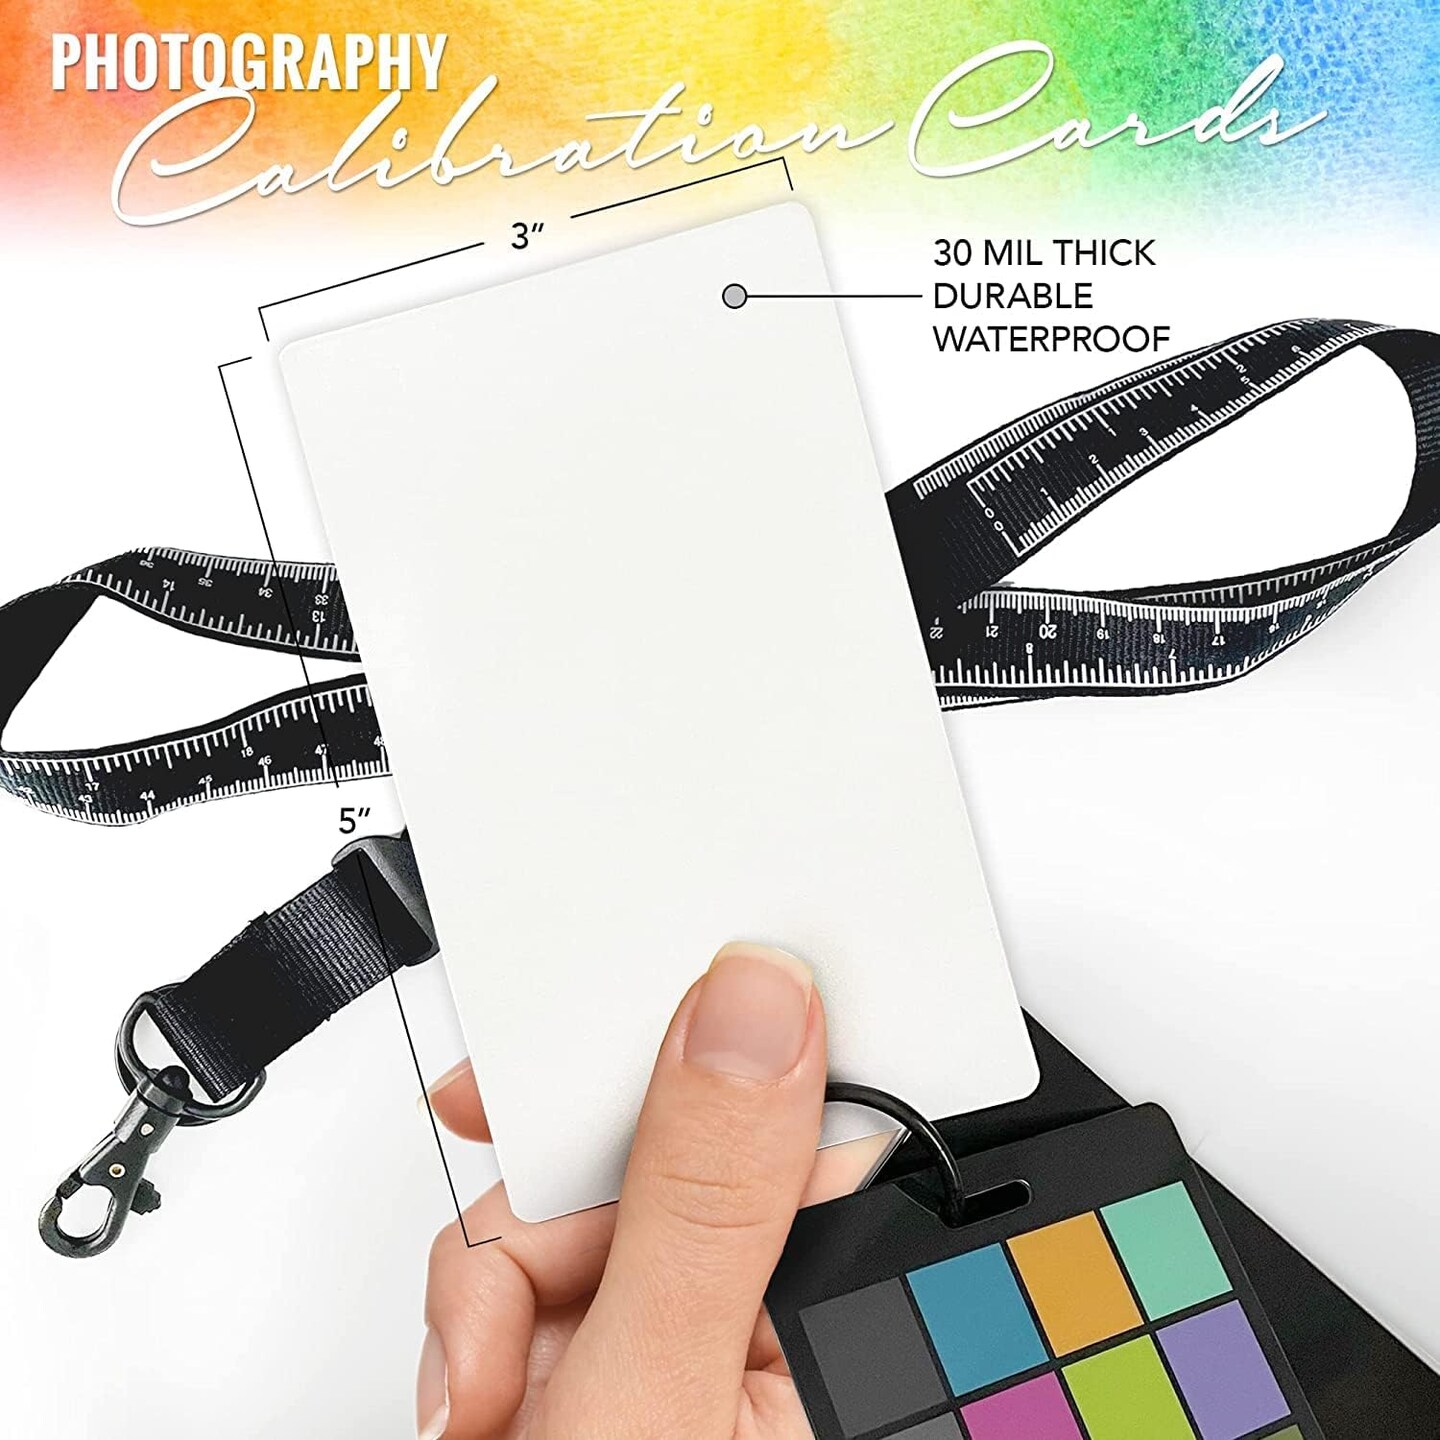 Pixiss Portable Photography Accessories - 12x12 Foldable White Balance Reflector, Grey Reference &#x26; White Balance Card, 4In1 Color Correction Card Set and Measuring Tape Lanyard by Pixiss